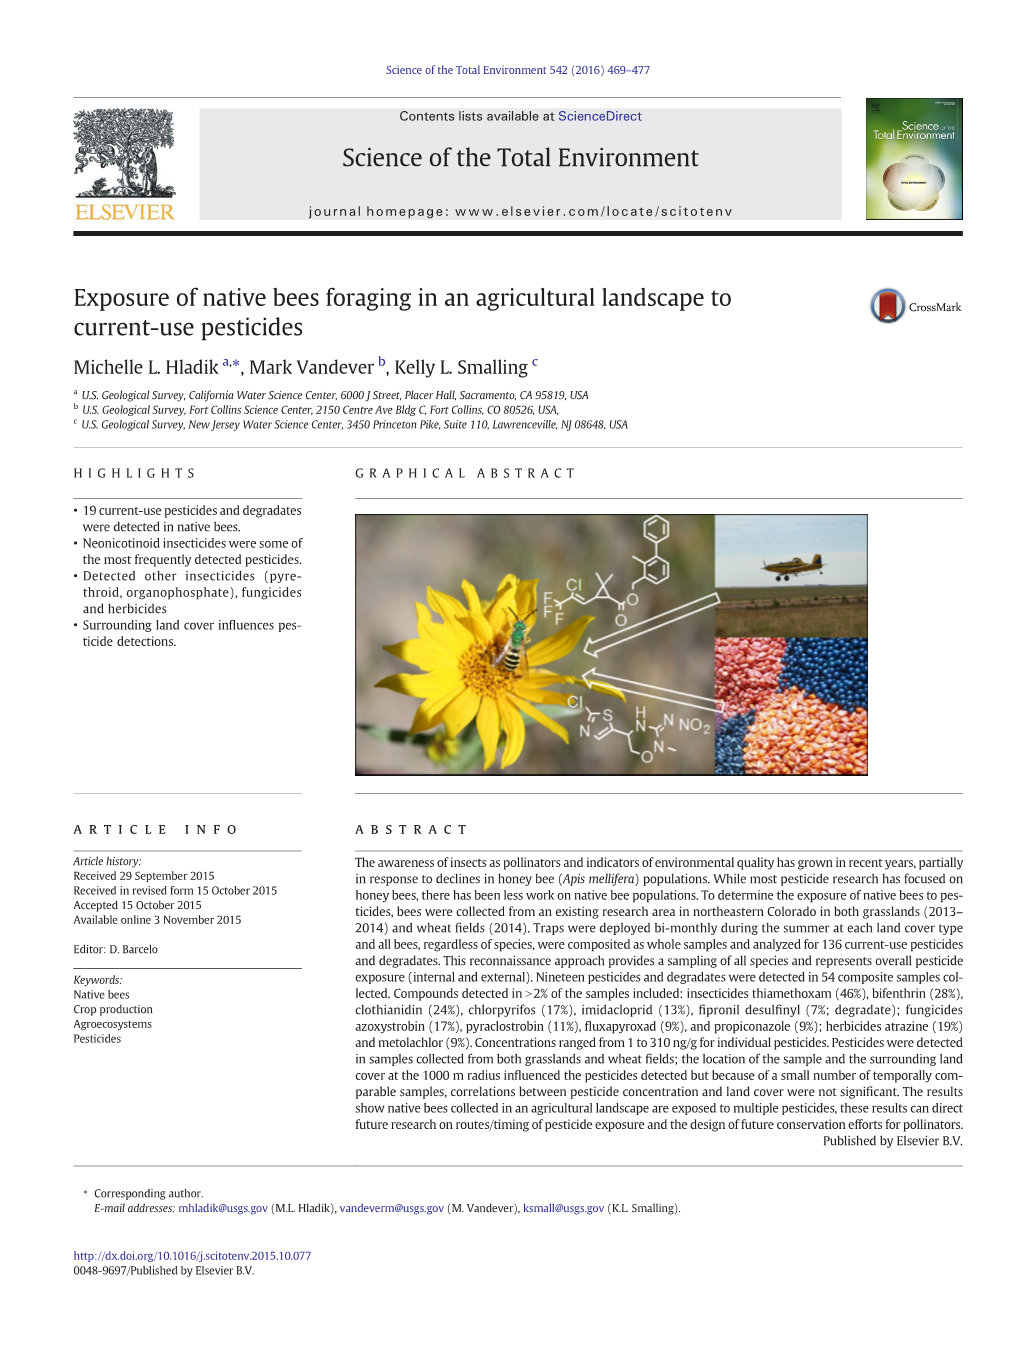 Exposure of Native Bees Foraging in an Agricultural Landscape to Current-Use Pesticides